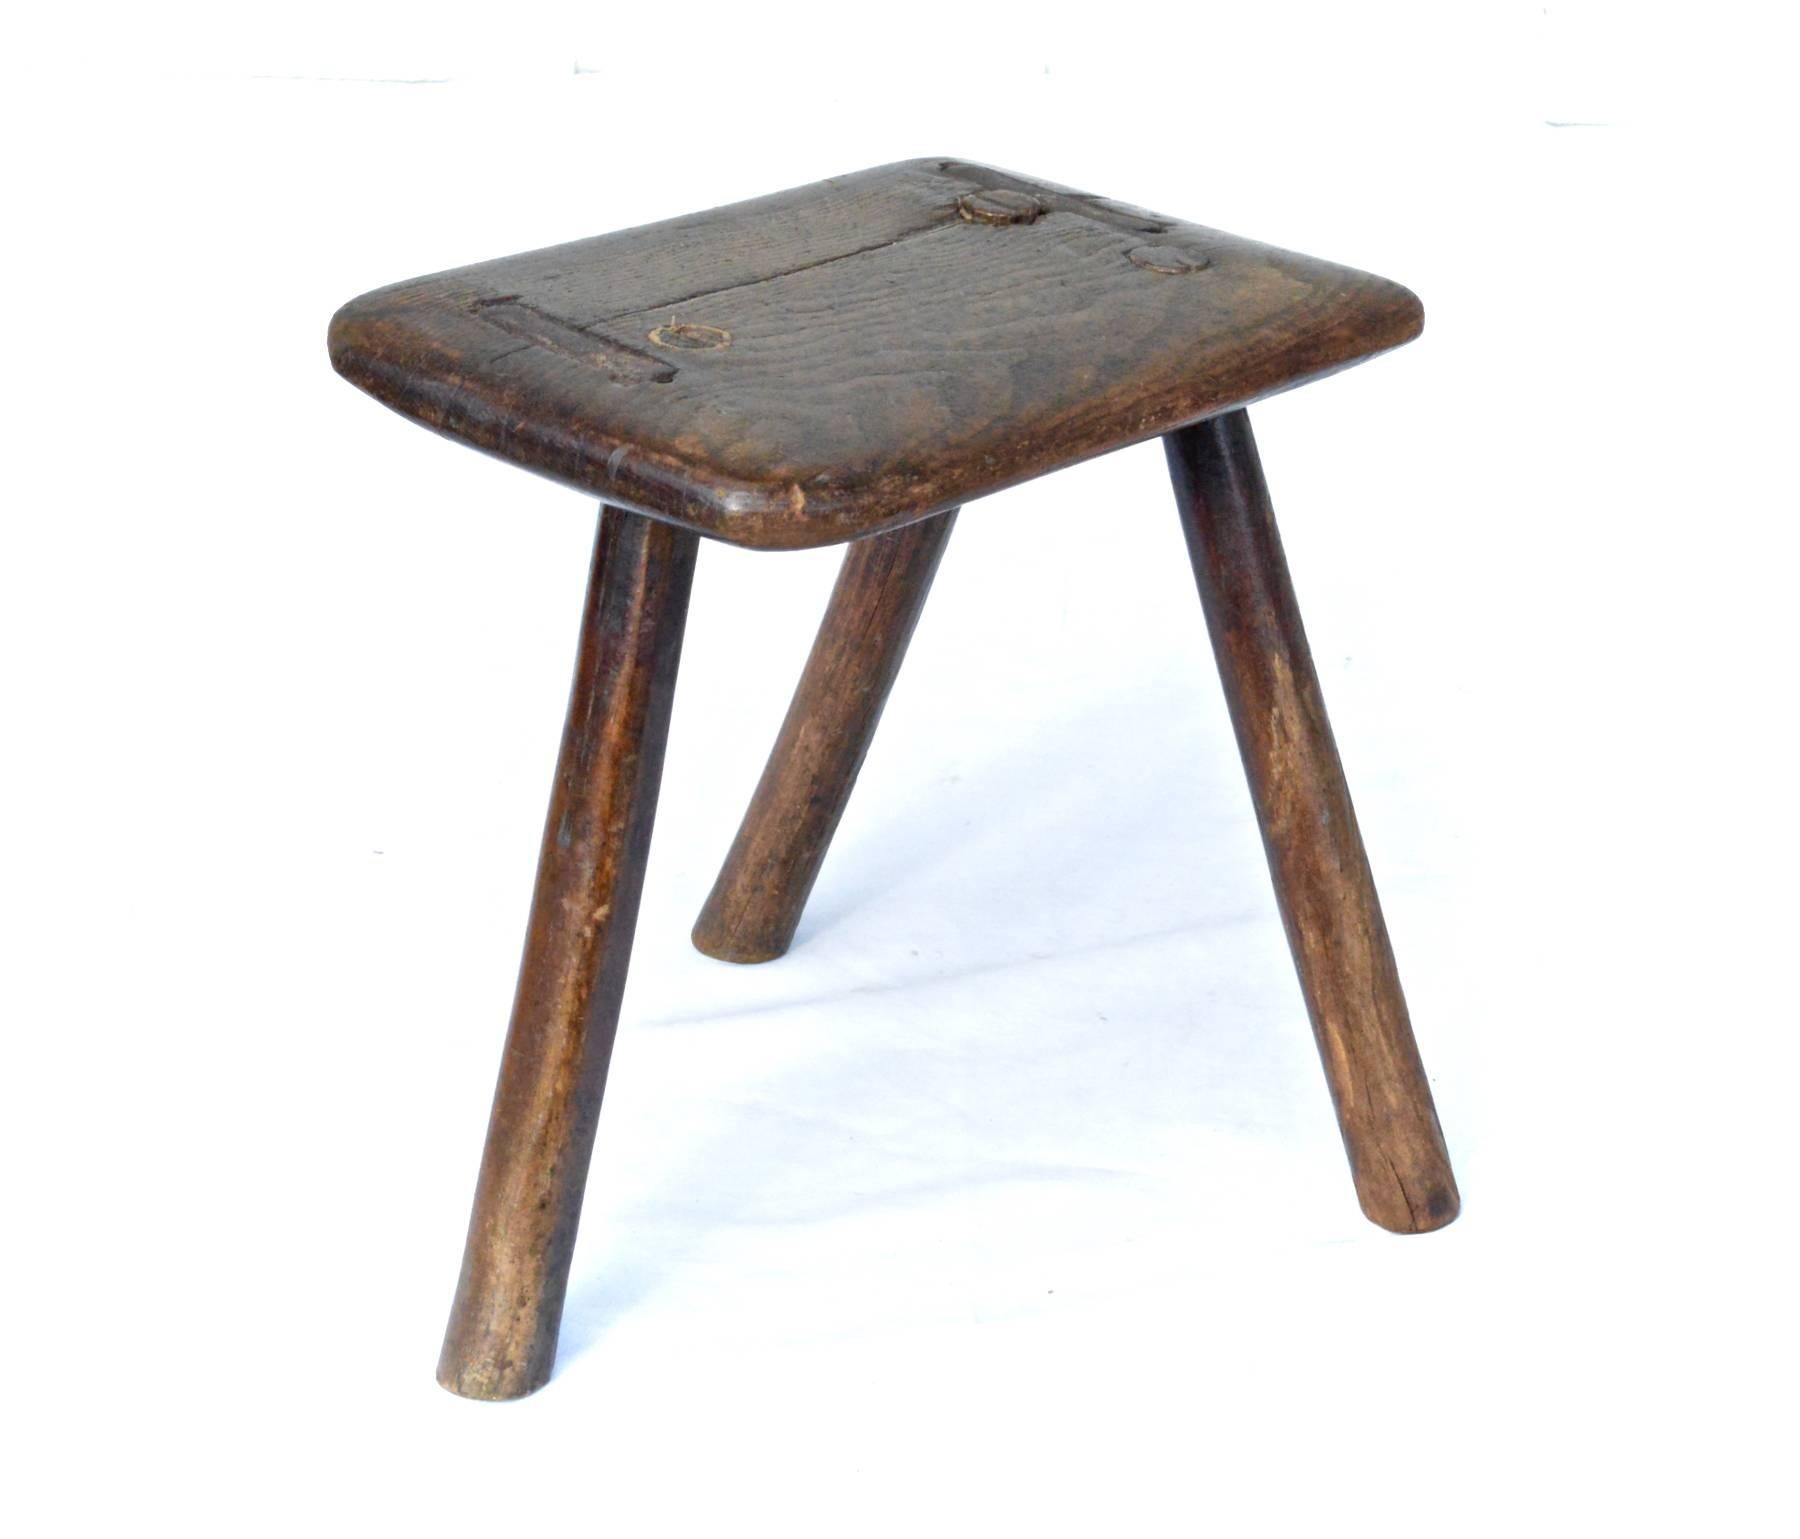 An interesting little 18th century footstool or plant stand of pine. A plank top houses three tripod shaped legs. The surface is silky and smooth with a great deal of natural patina.